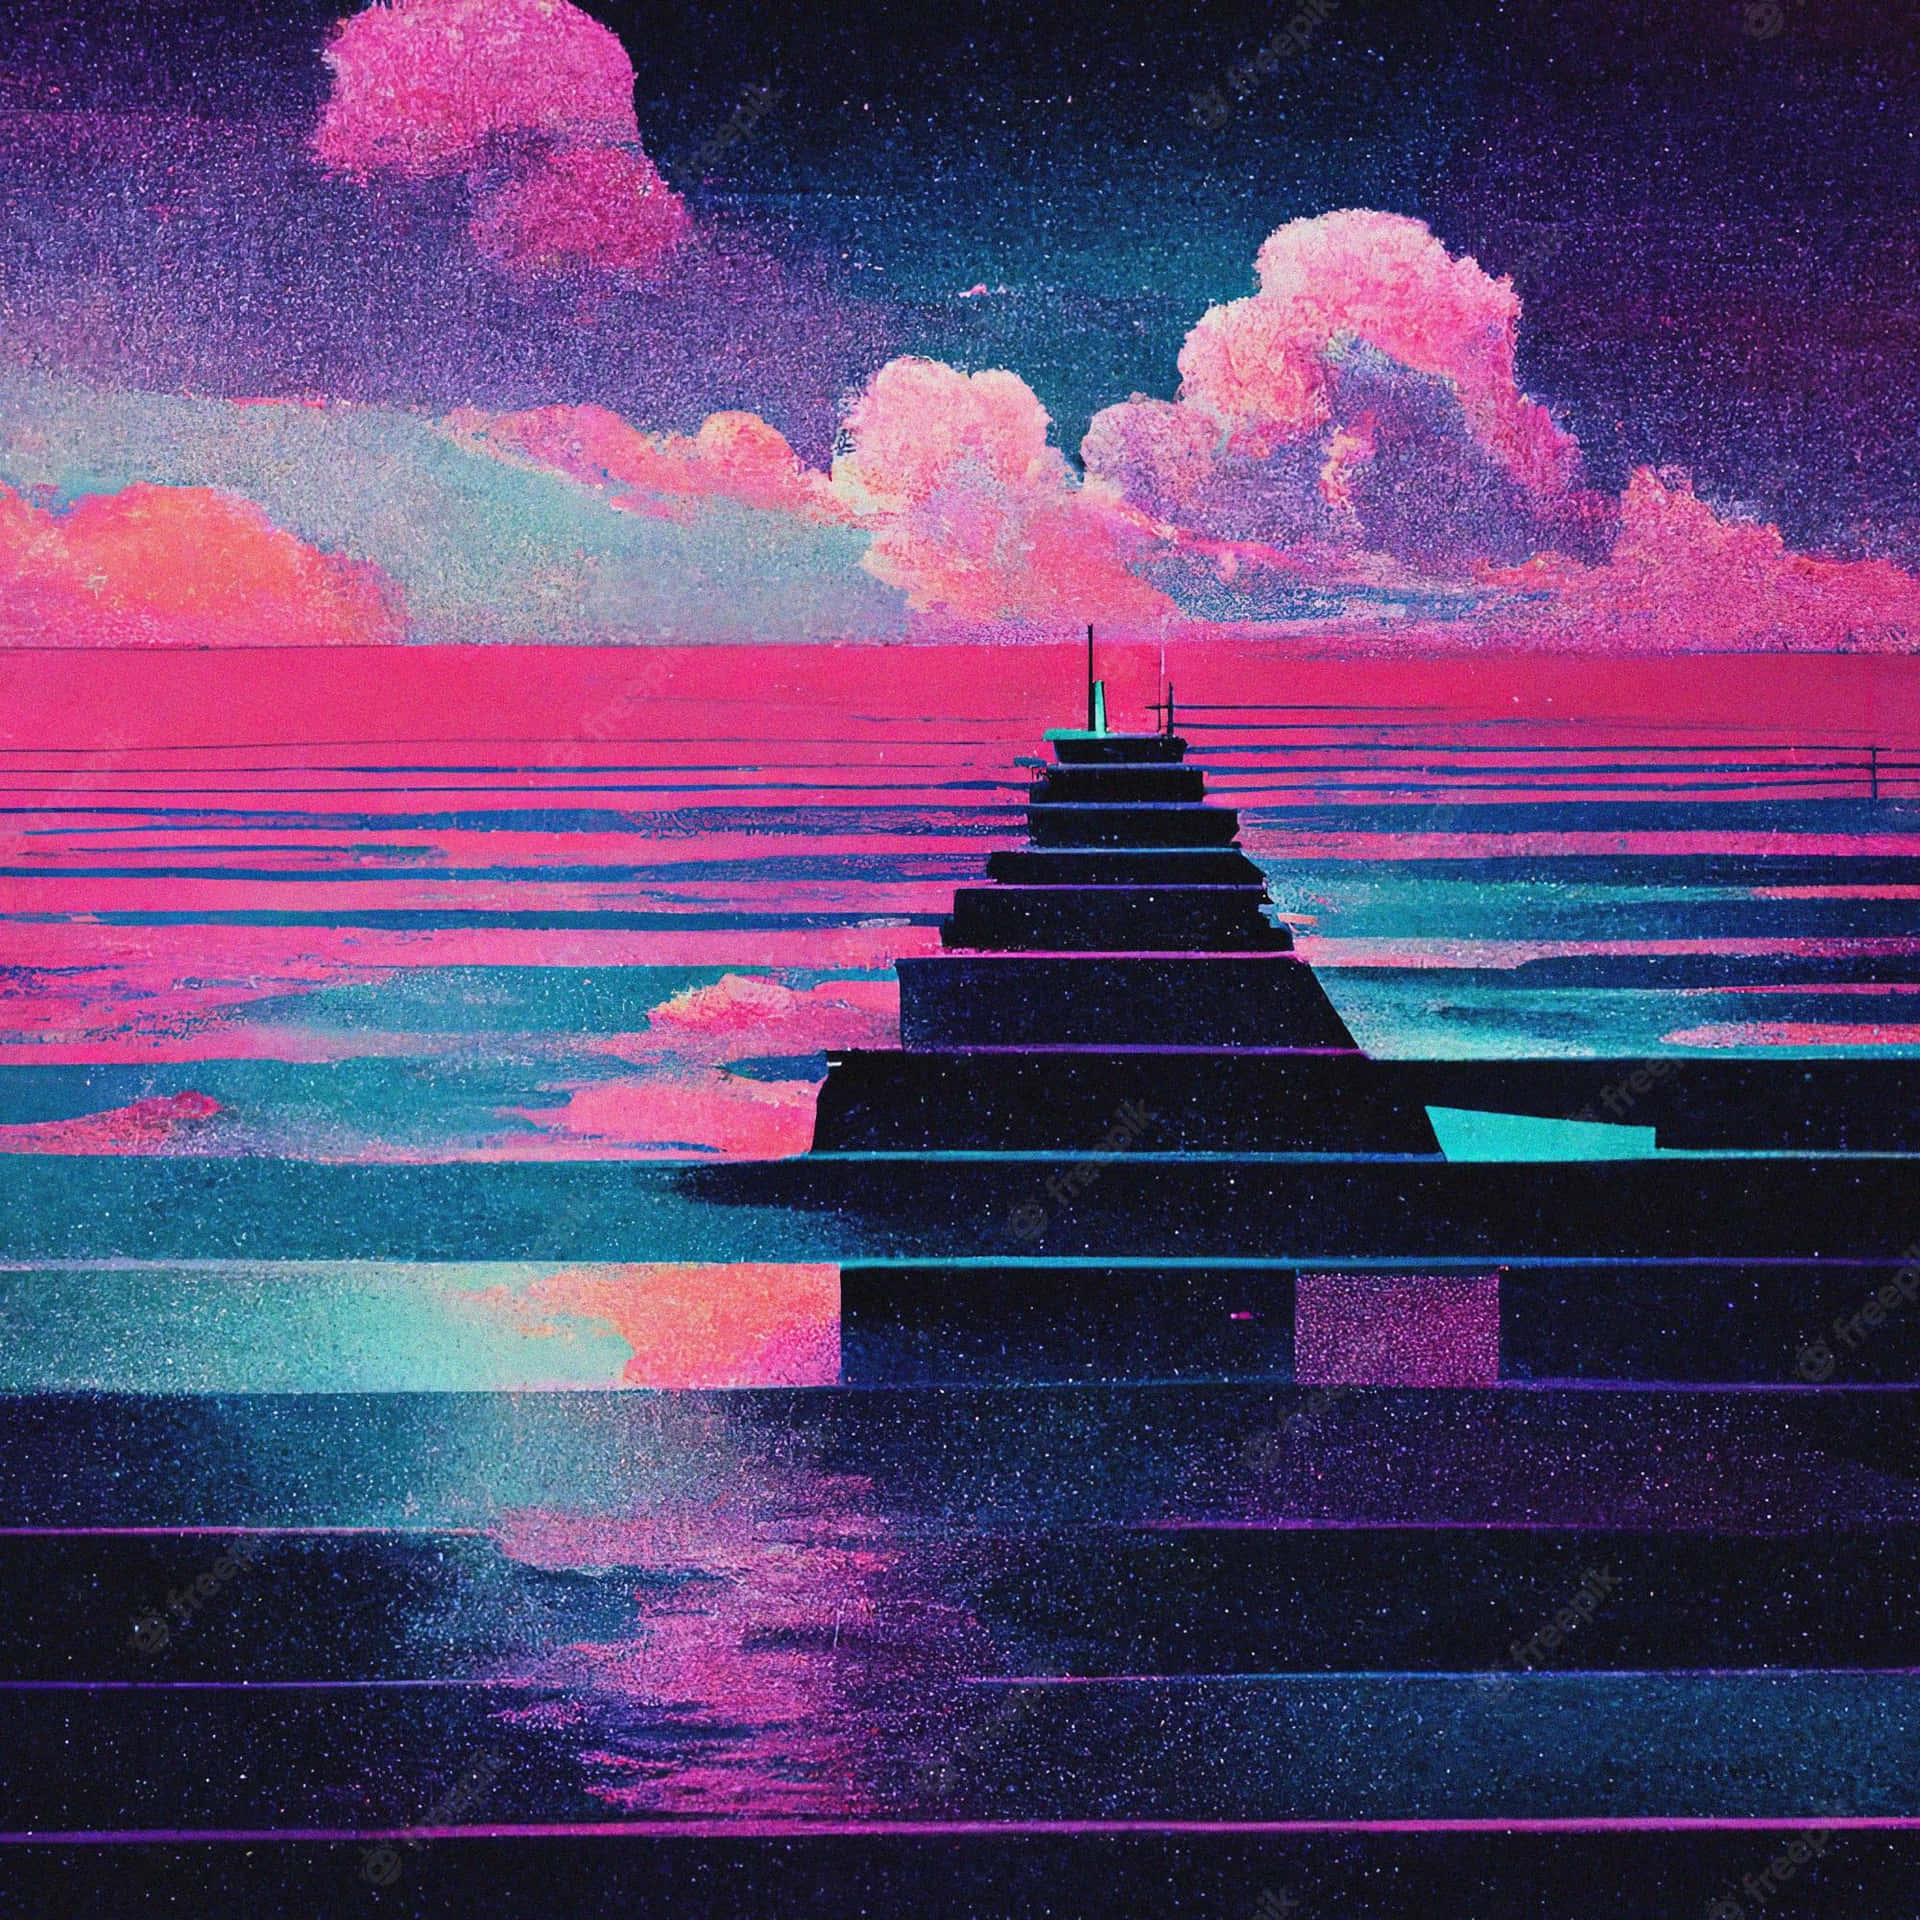 Step back in time with a Vintage Retro Phone Wallpaper